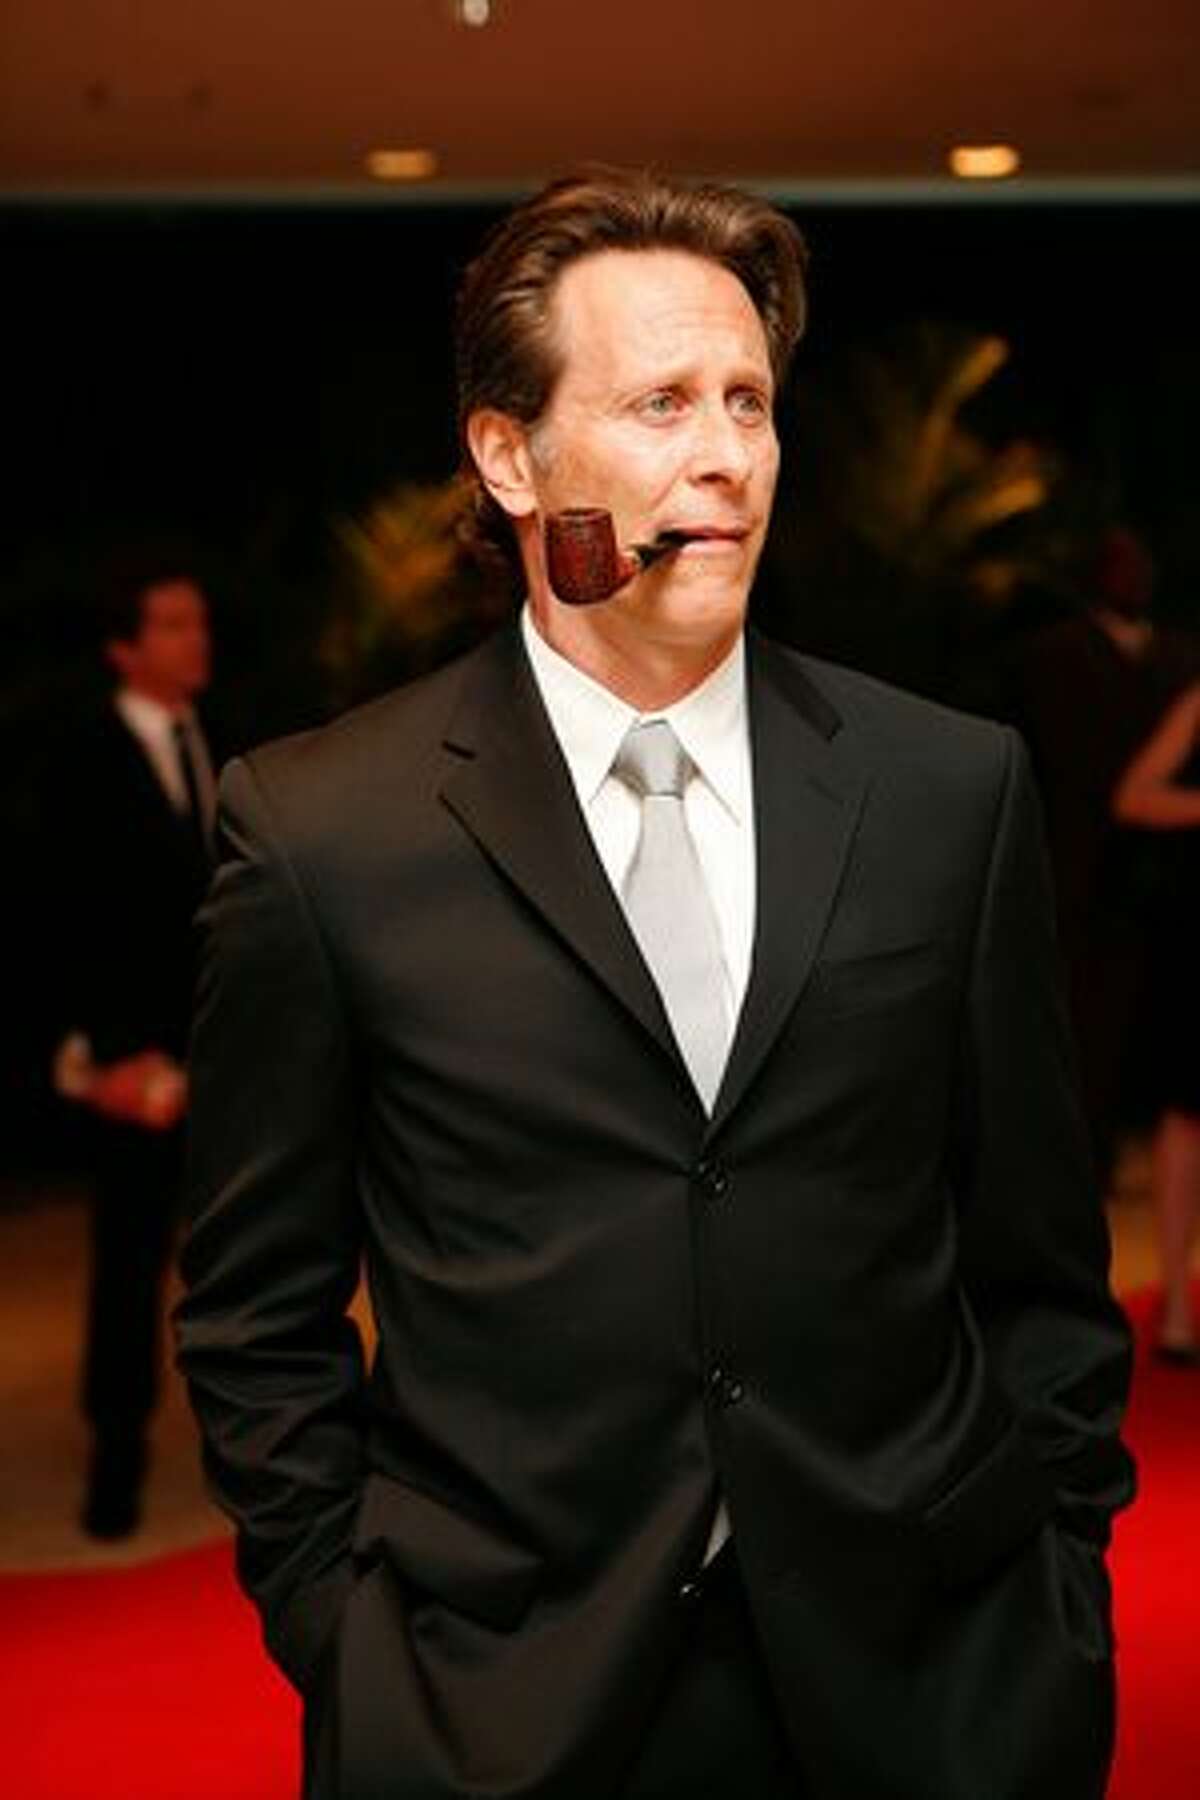 Actor Steven Weber arrives at the White House Correspondents' Association dinner on May 1, 2010 in Washington, D.C. The annual dinner featured comedian Jay Leno and was attended by President Barack Obama and First Lady Michelle Obama.